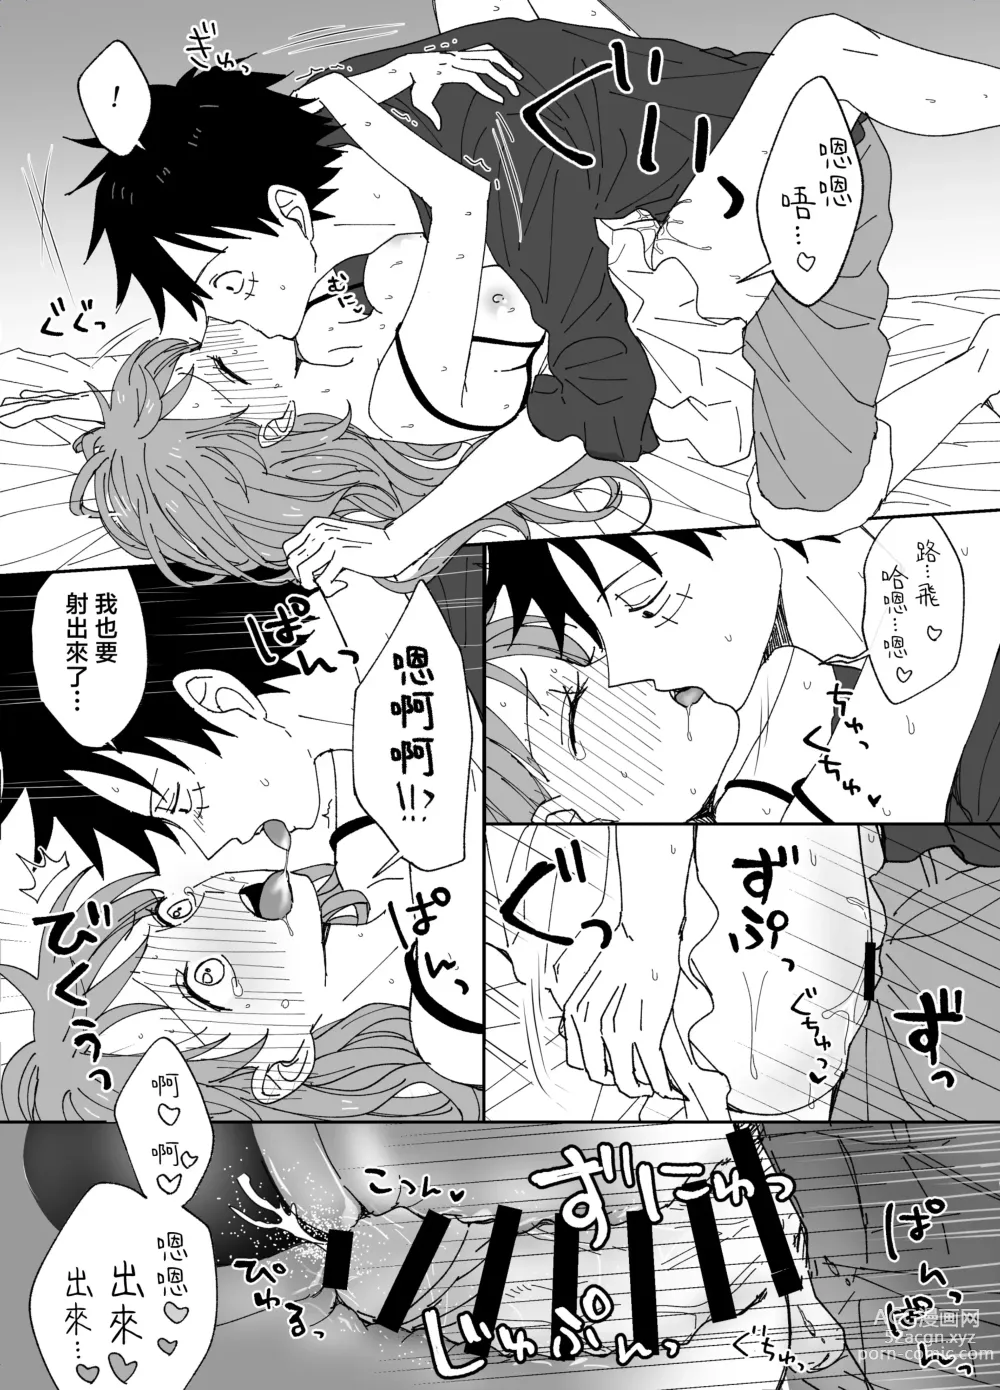 Page 34 of doujinshi 路娜日志 1